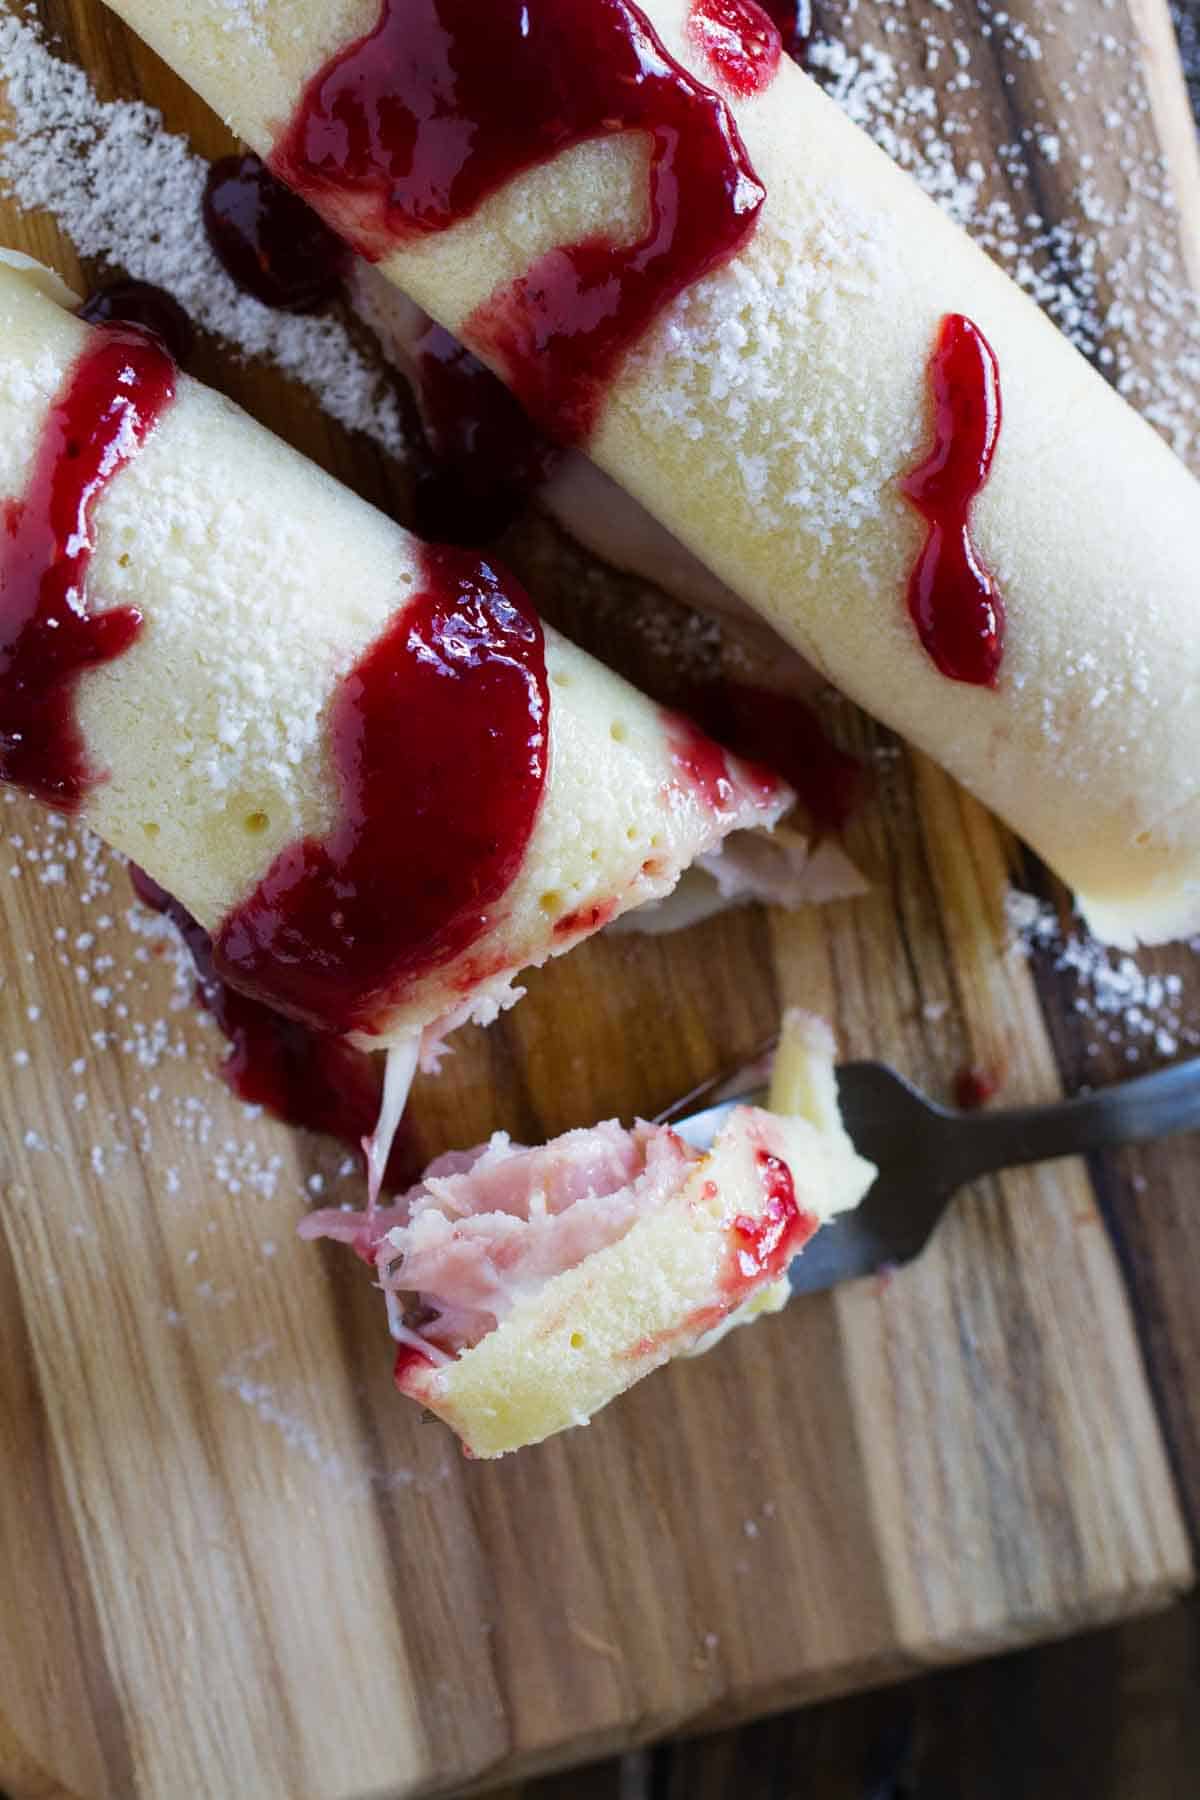 Overhead view of monte cristo crepes with a piece on a fork.